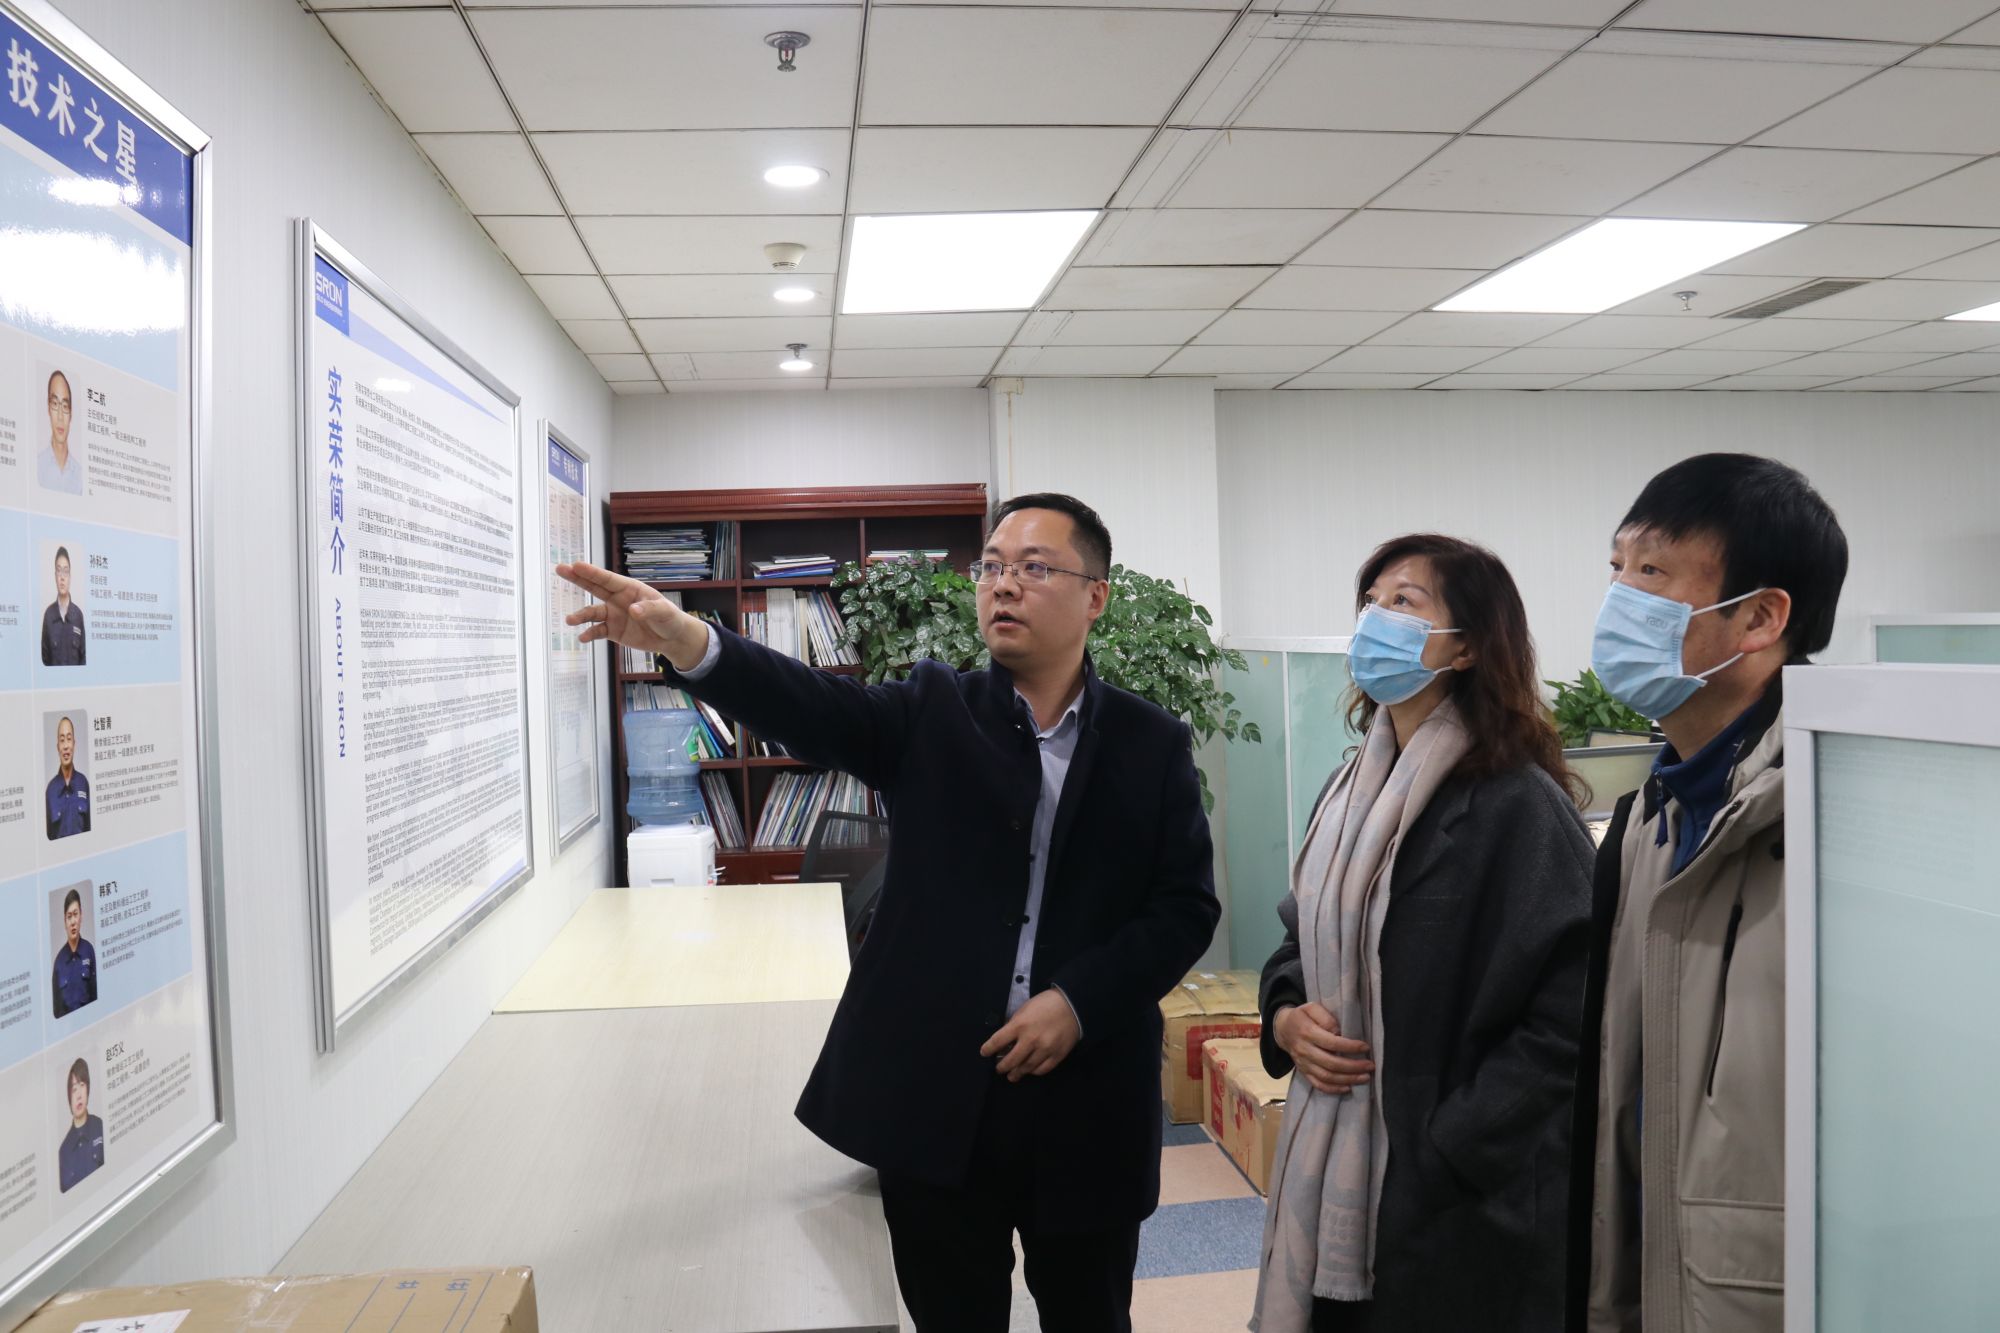 Leaders of CCOIC Henan Chamber of Commerce visit SRON company